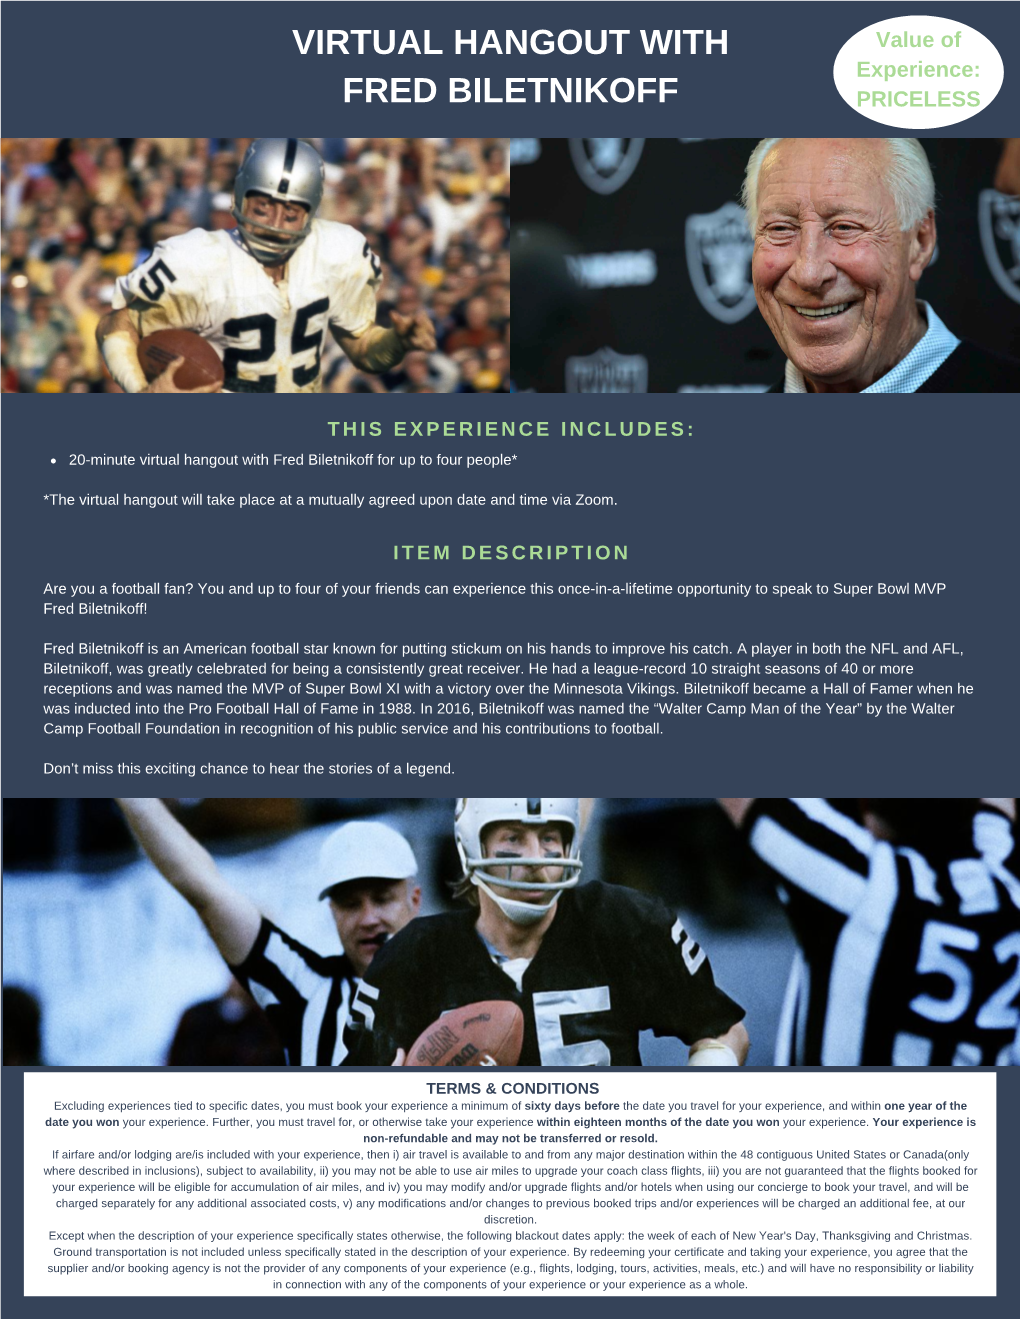 Virtual Hangout with Fred Biletnikoff for up to Four People*